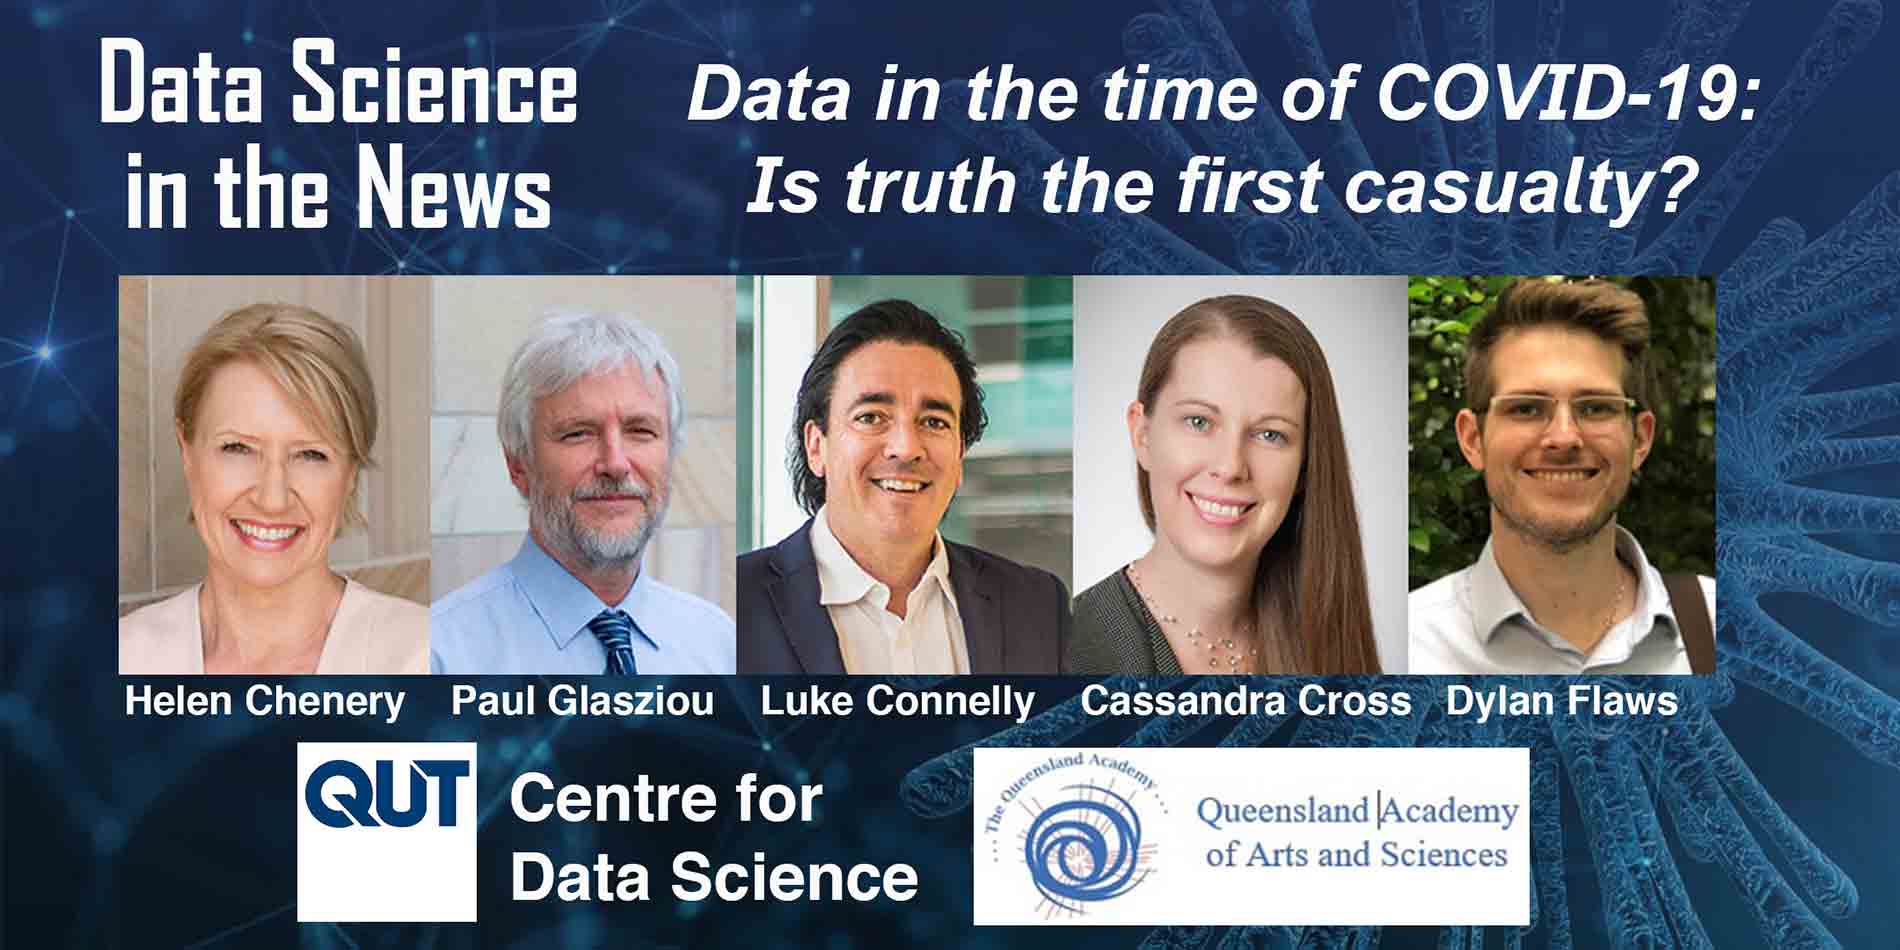 Data Science in the News event banner featuring the 5 speakers